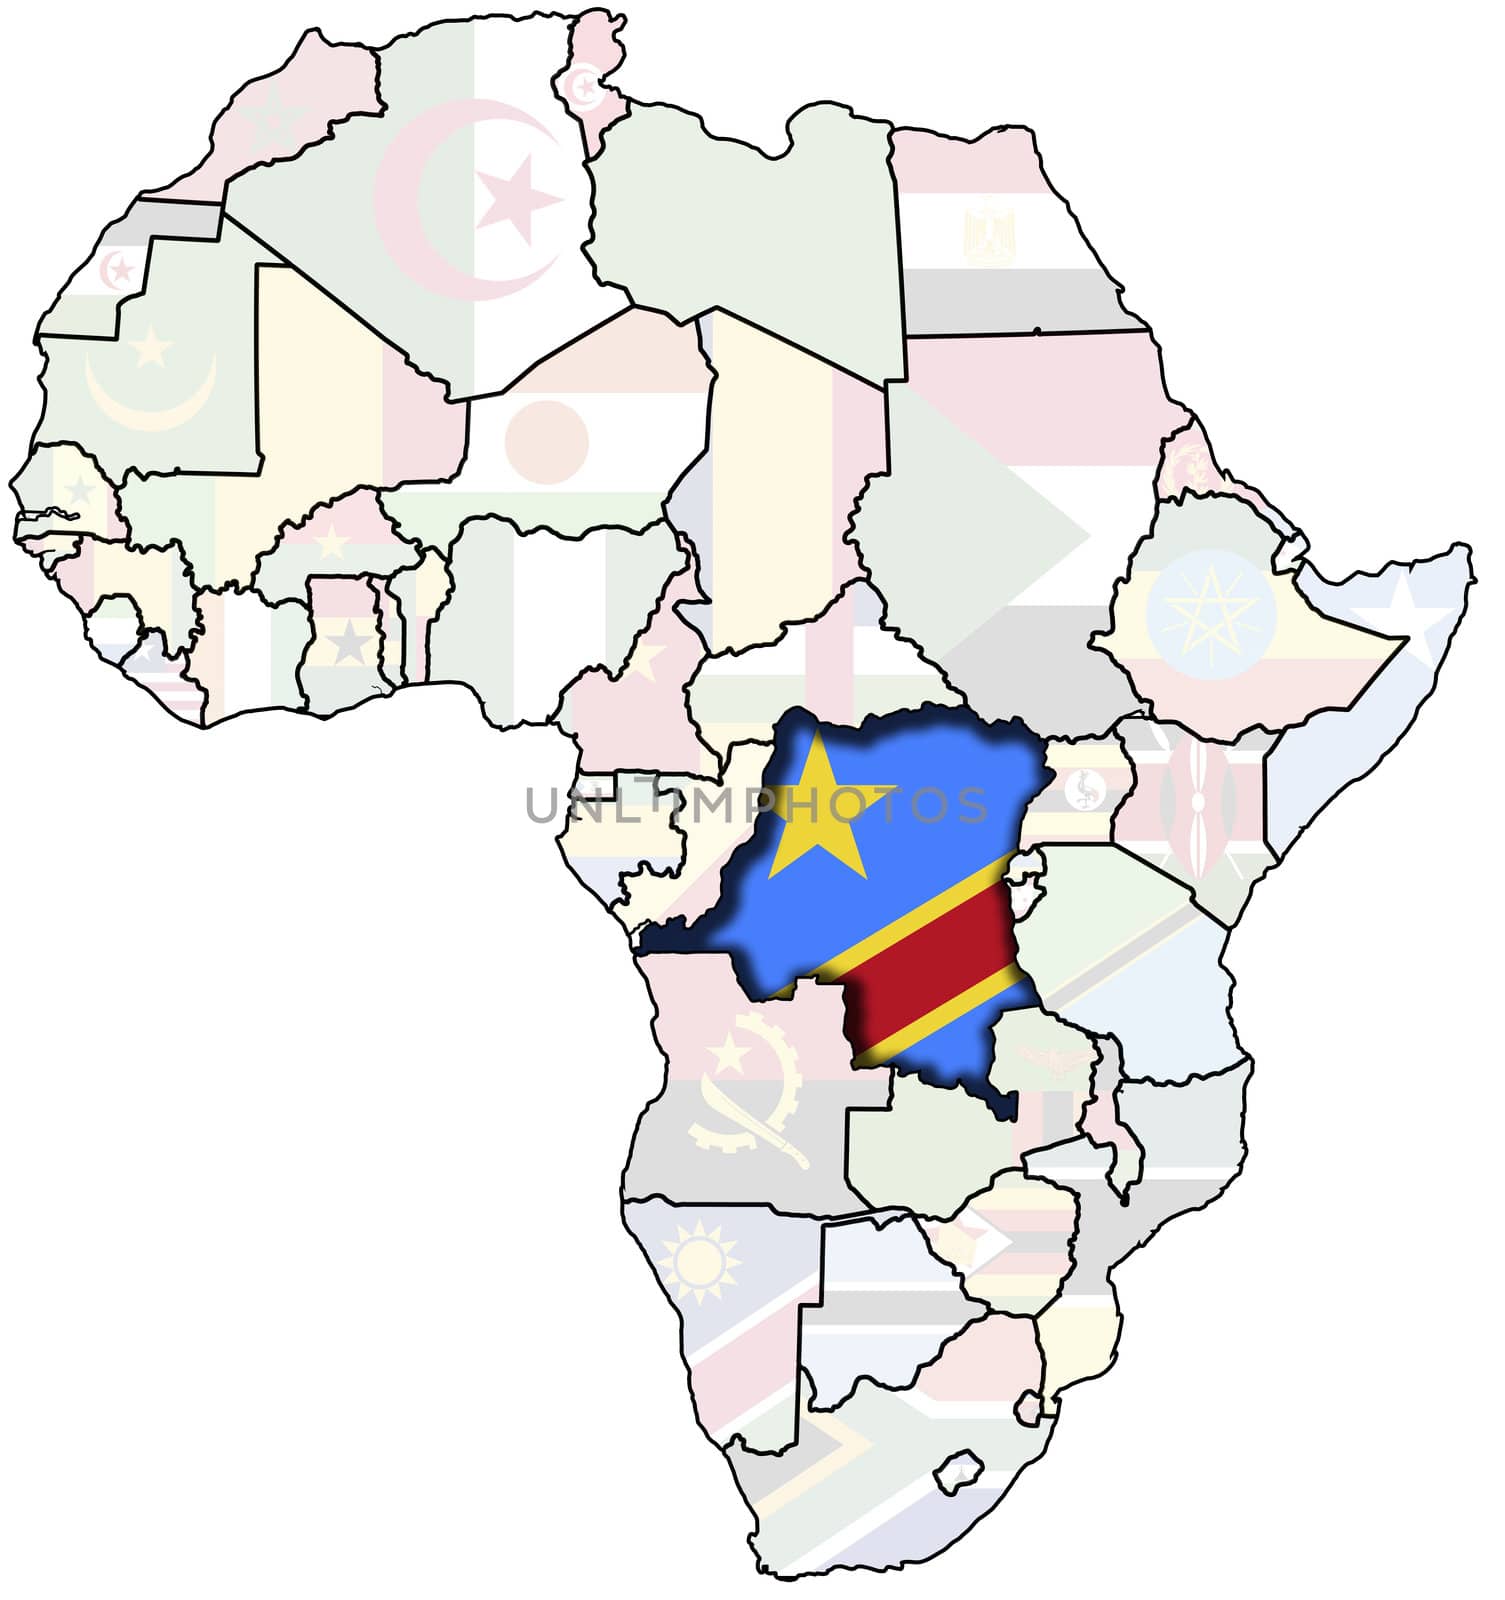 congo on africa map by michal812